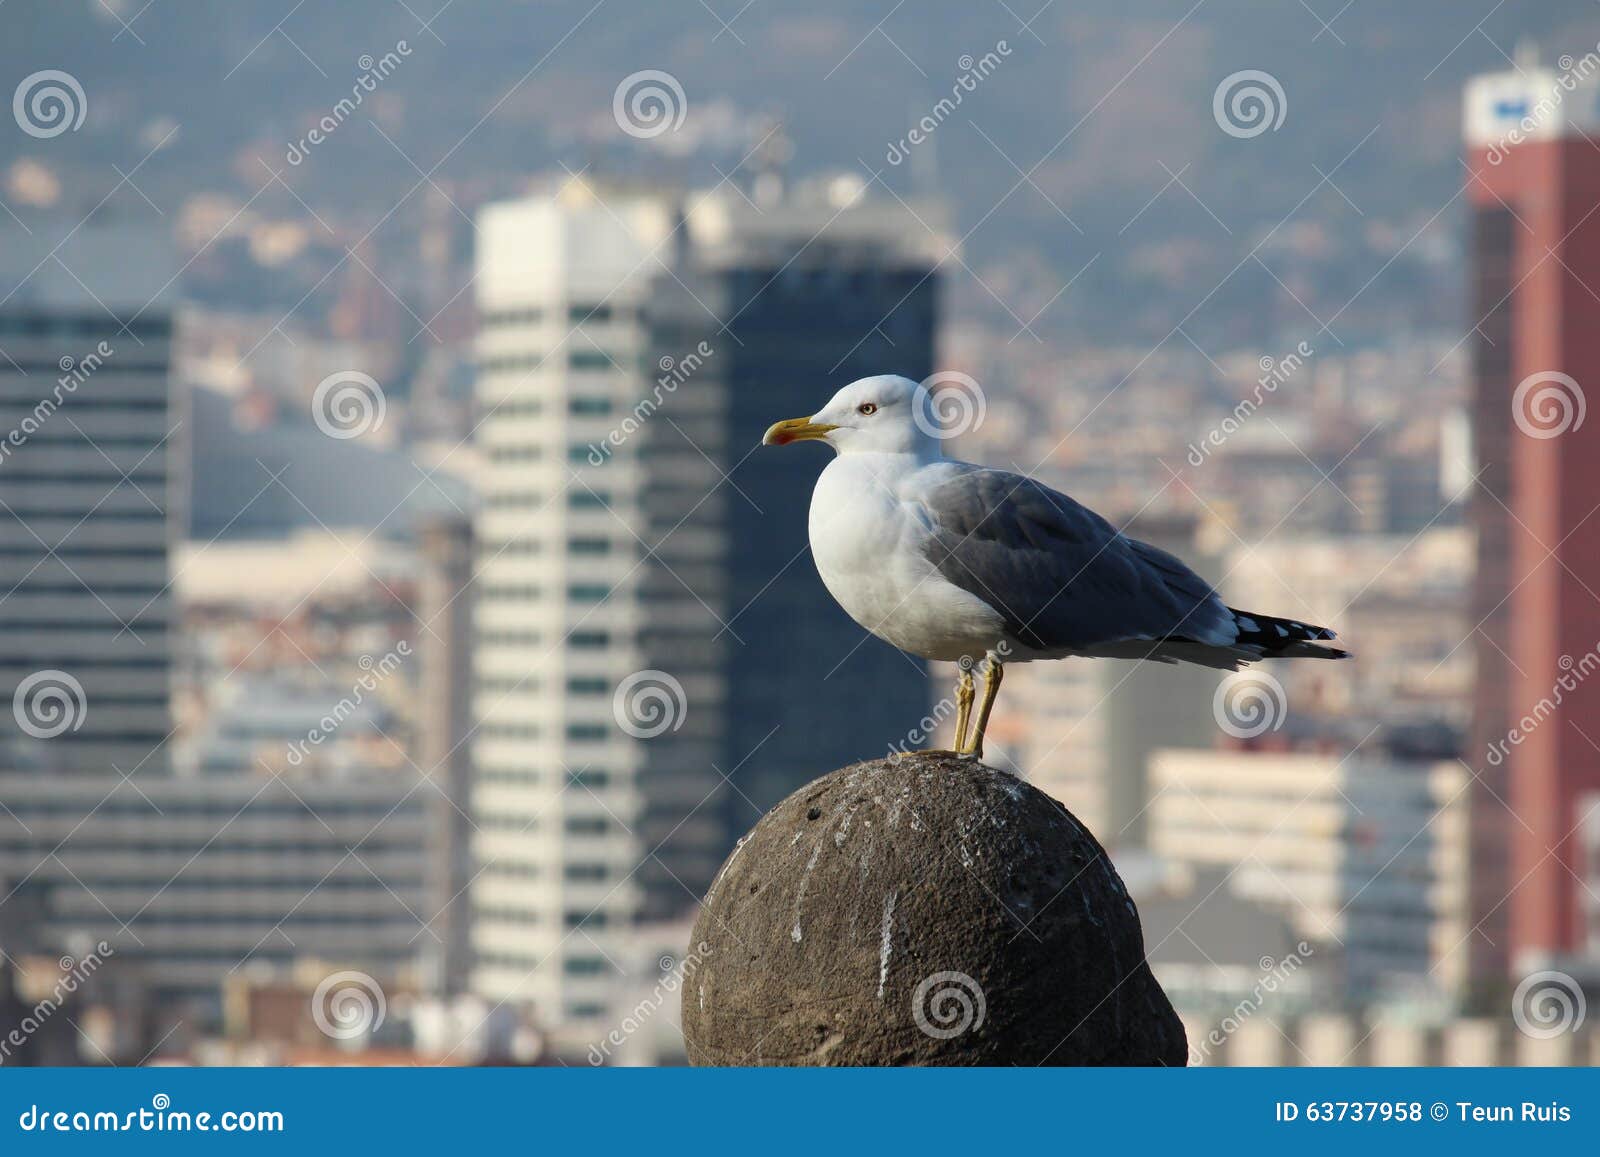 seagull view of barcelona